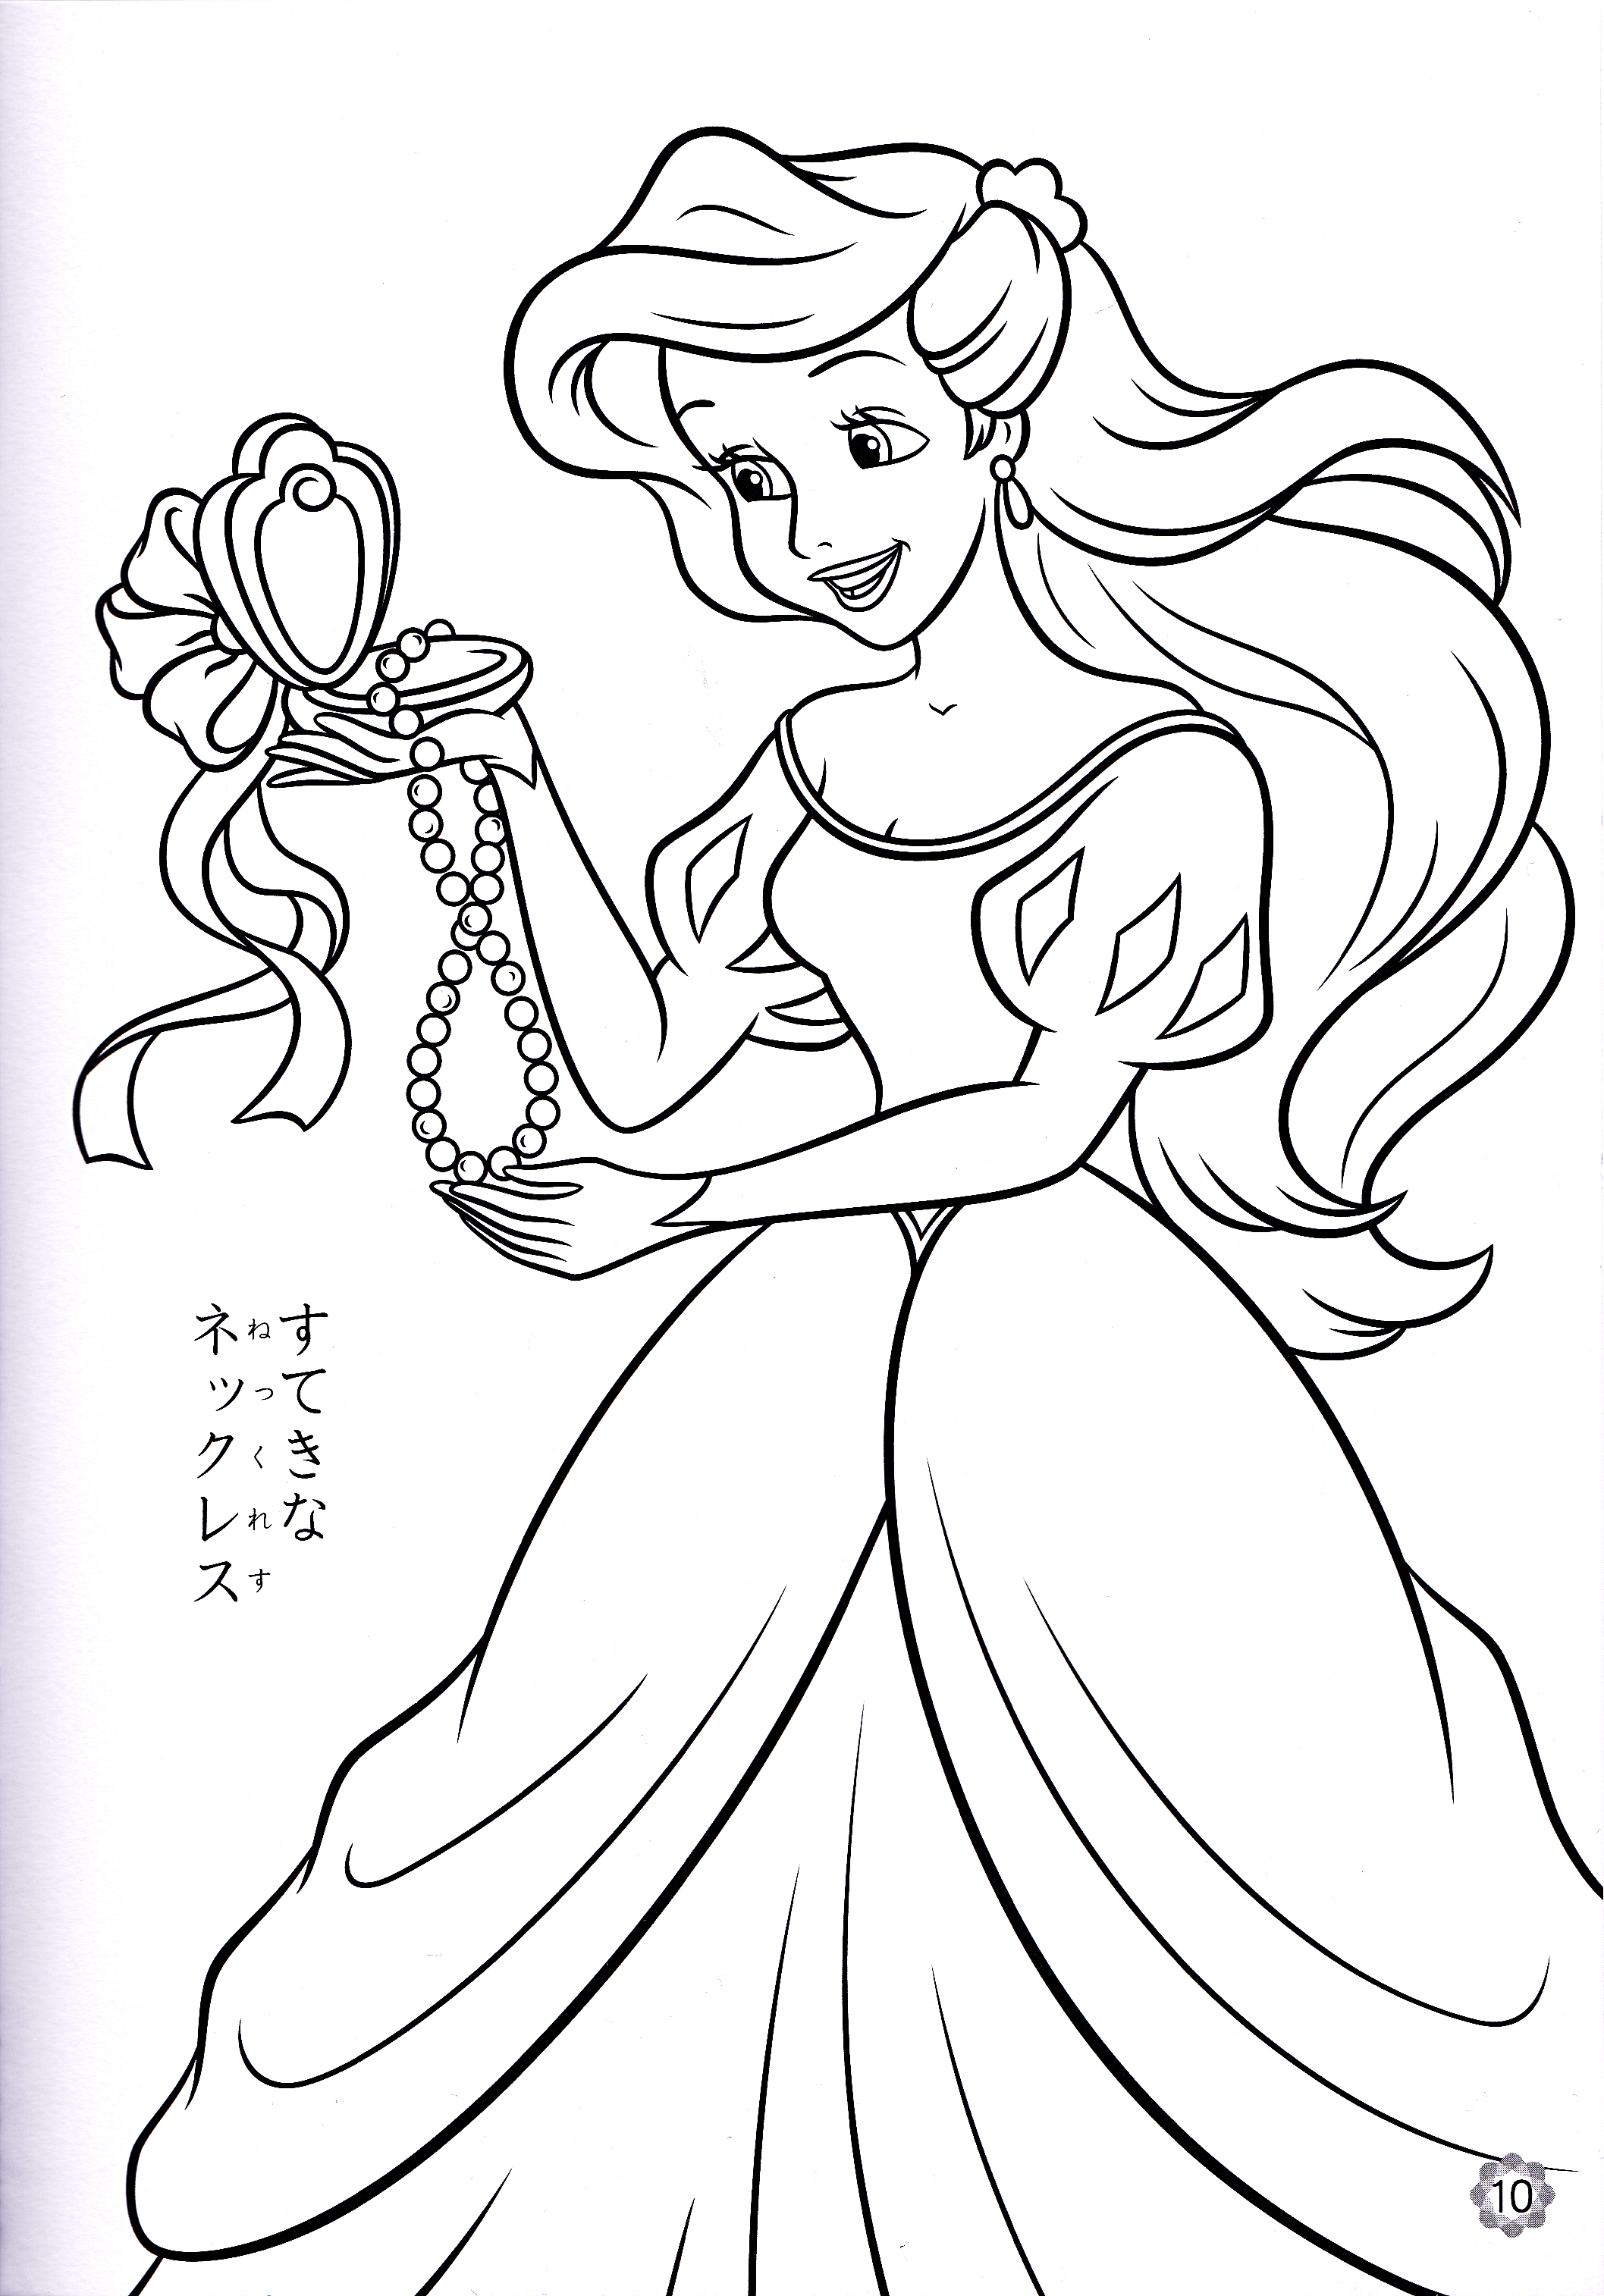 The Little Mermaid coloring page Colouring Book Pinterest